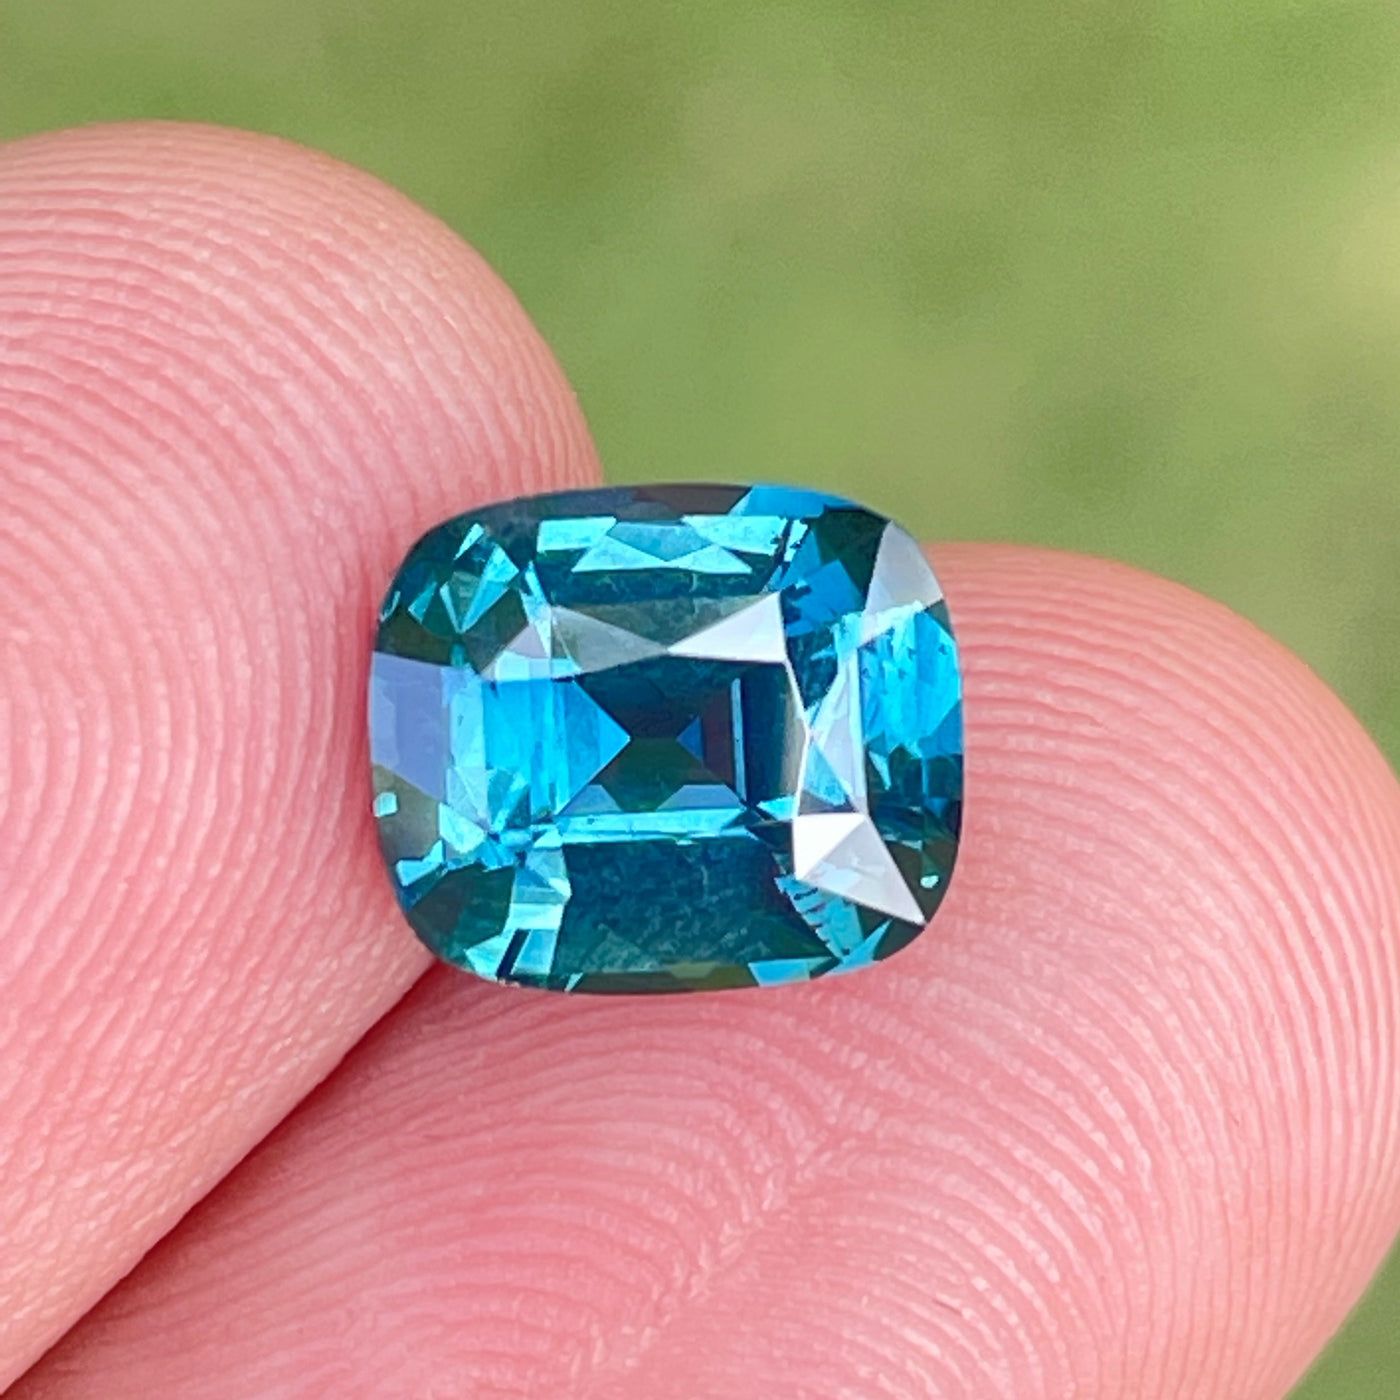 TEAL SAPPHIRE 2.53 CT